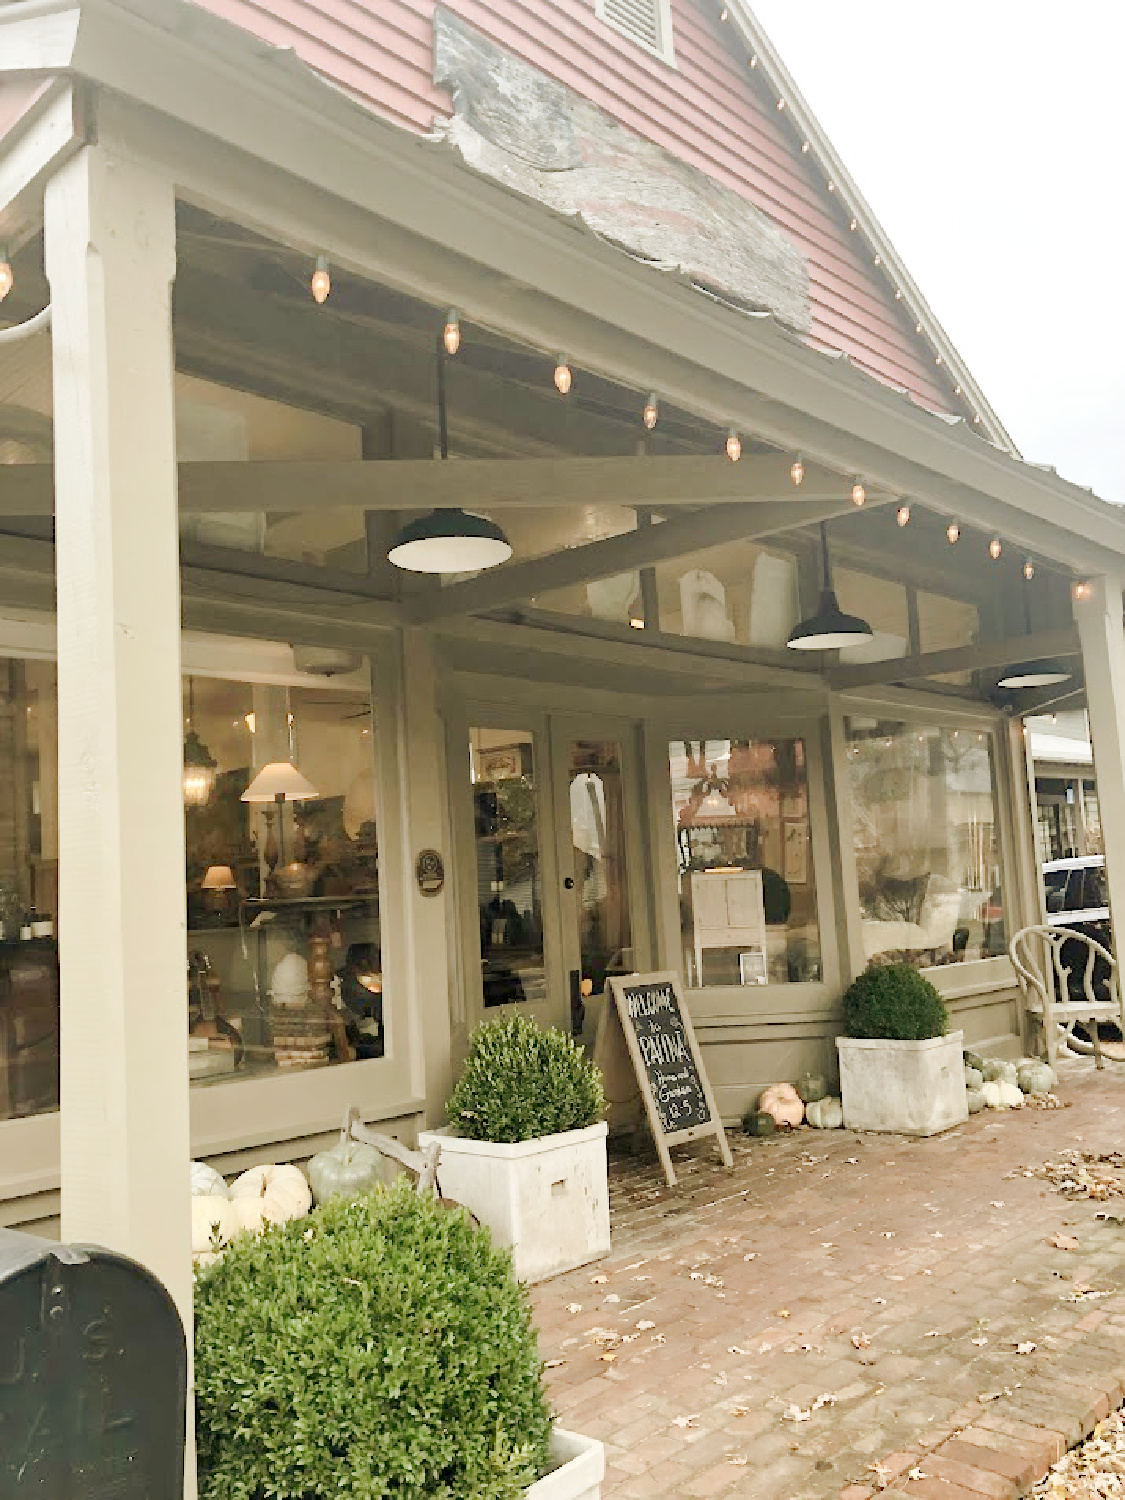 Exterior of Patina Home & Garden shop from Giannettis in Leiper's Fork, TN - Hello Lovely Studio. #patinahome